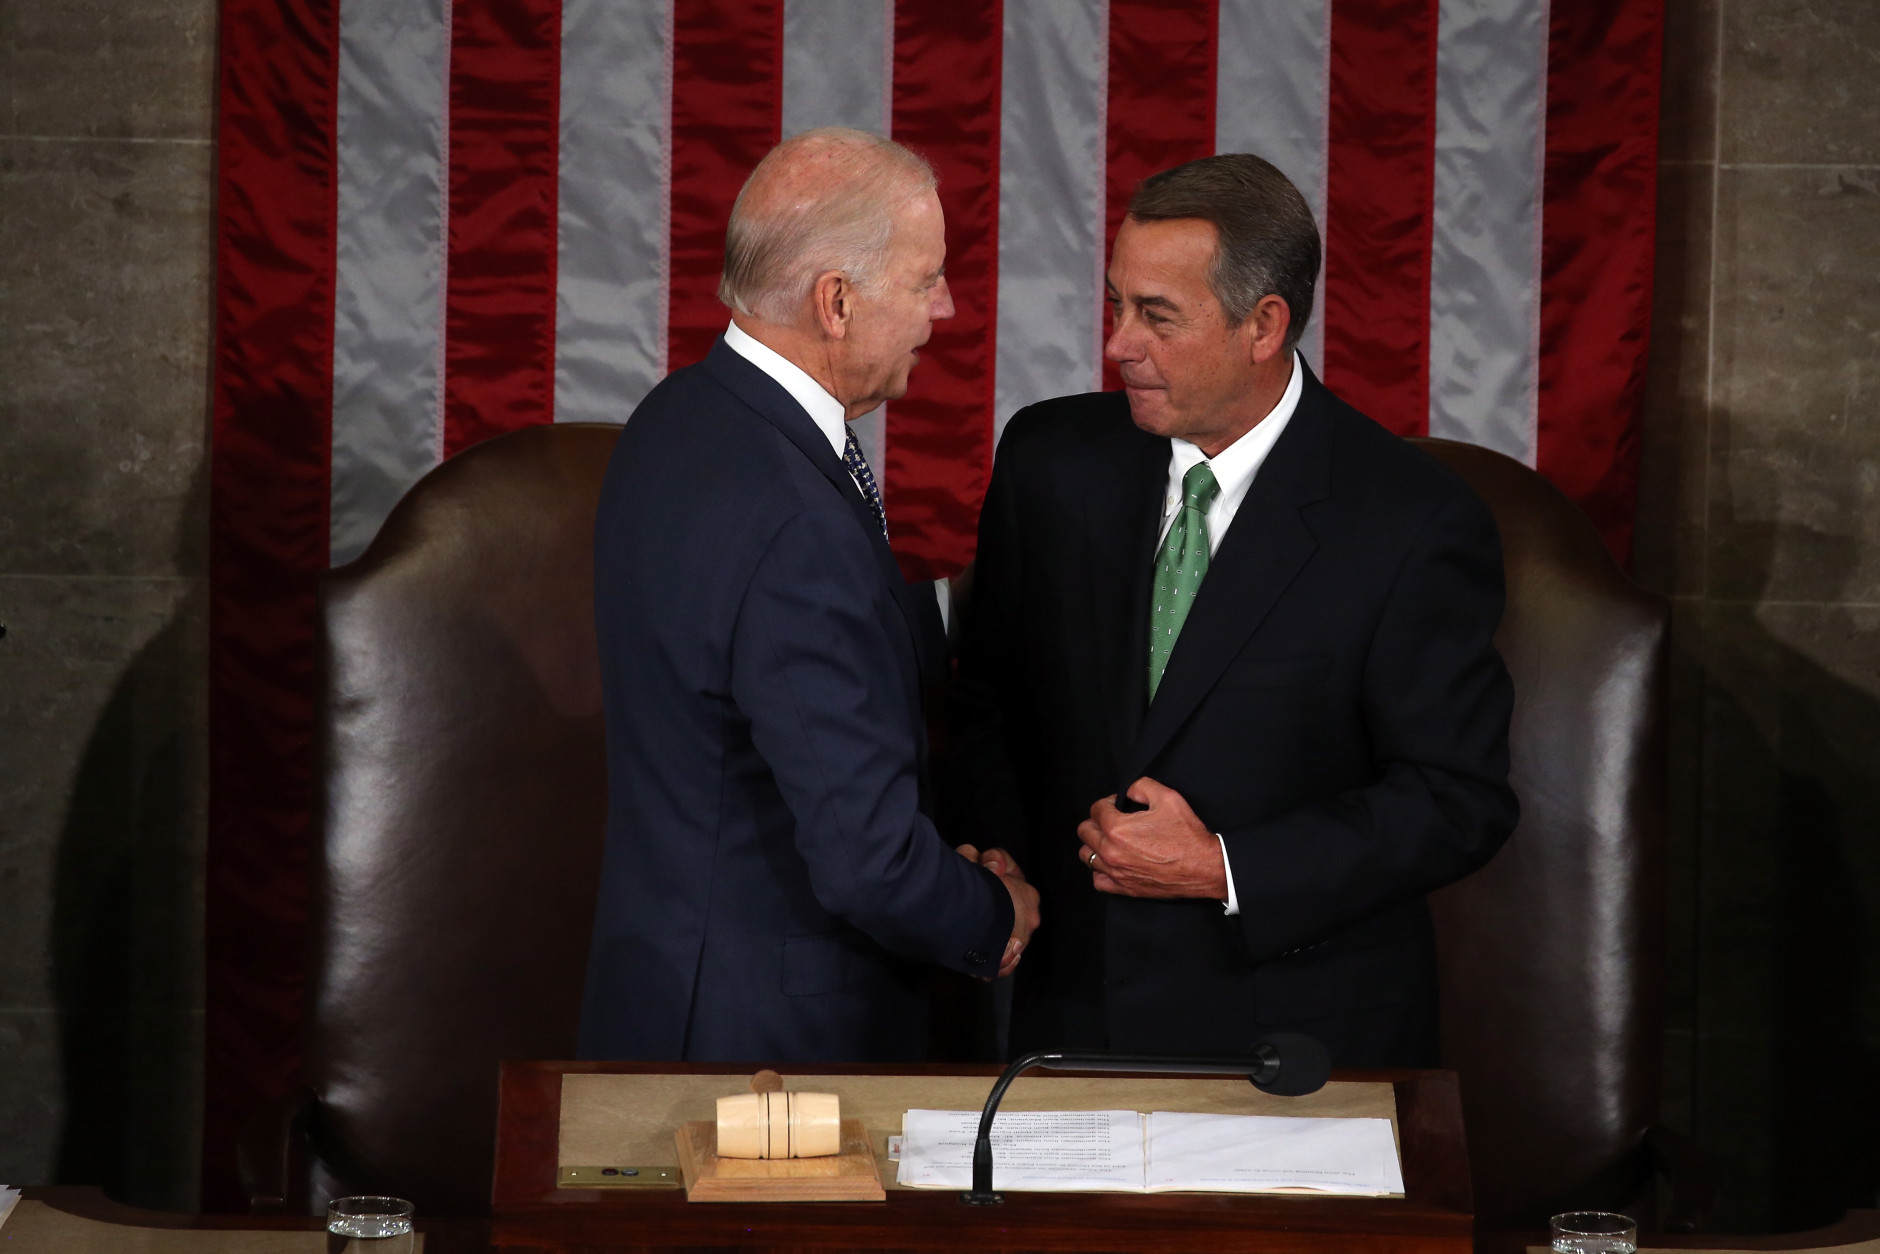 WASHINGTON, DC - SEPTEMBER 24:  Vice President Joe Biden (L) and Speaker of the House John Boehner (R-OH) shake hands prior to Pope Francis speach at a joint meeting of the U.S. Congress in the House Chamber of the U.S. Capitol on September 24, 2015 in Washington, DC.  Pope Francis is the first pope to address a joint meeting of Congress and will finish his tour of Washington later today before traveling to New York City.  (Photo by Mark Wilson/Getty Images)